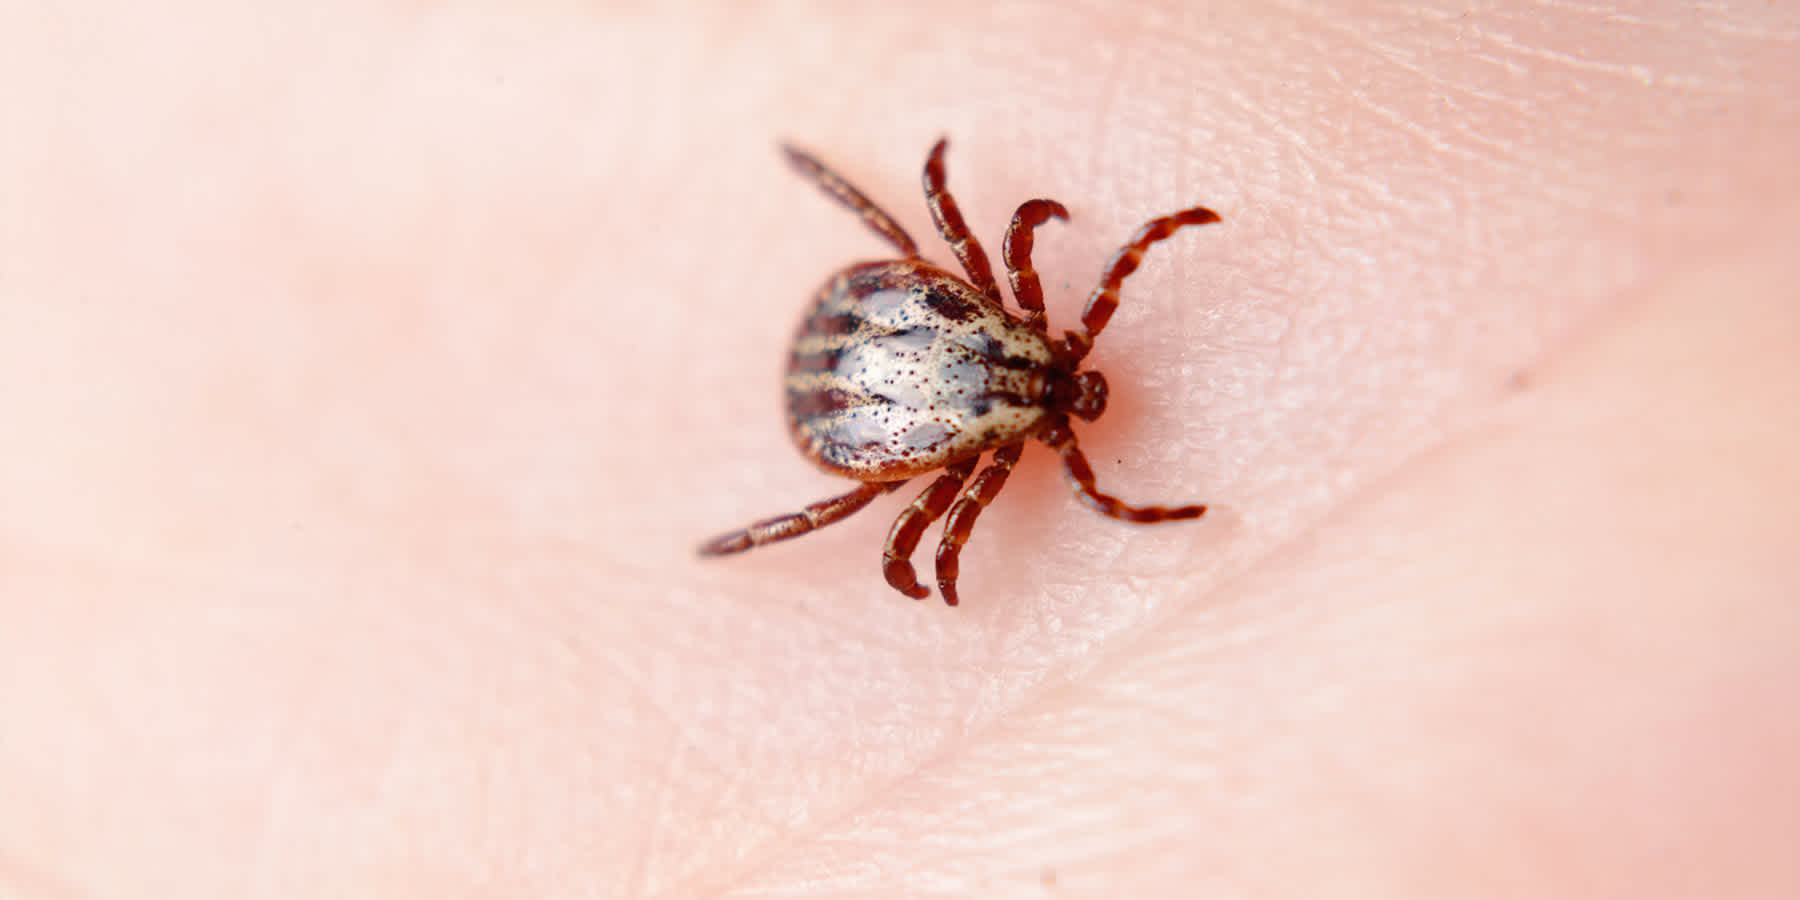 Tick with Lyme disease bacteria crawling on skin